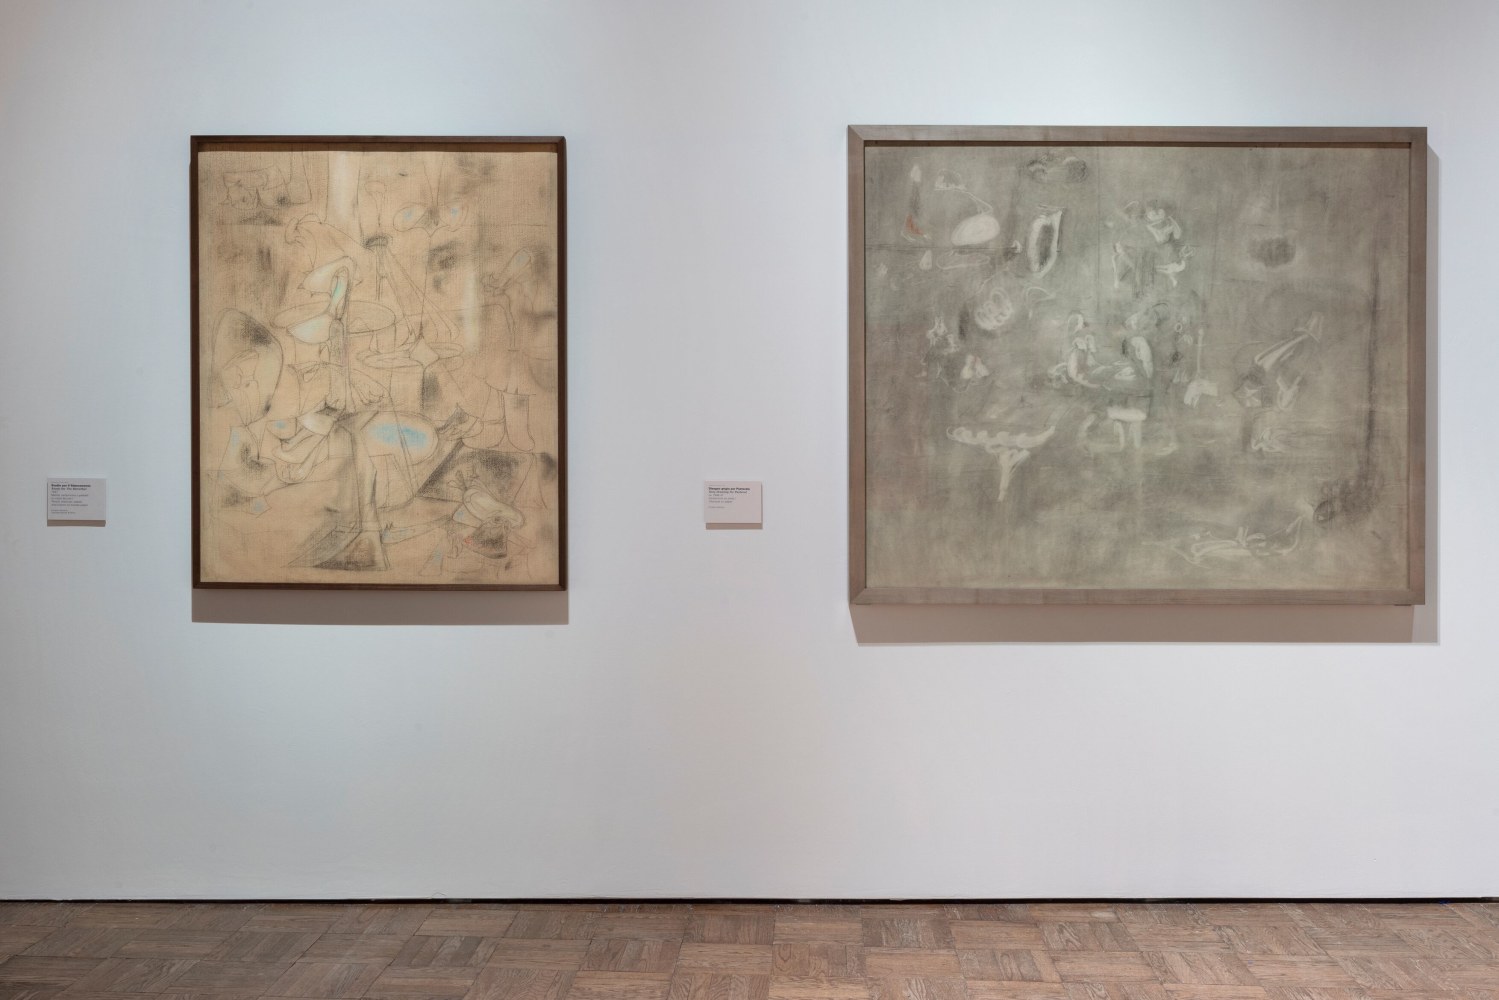 Installation photograph showing two charcoal drawings by Gorky: The Betrothal and Pastoral